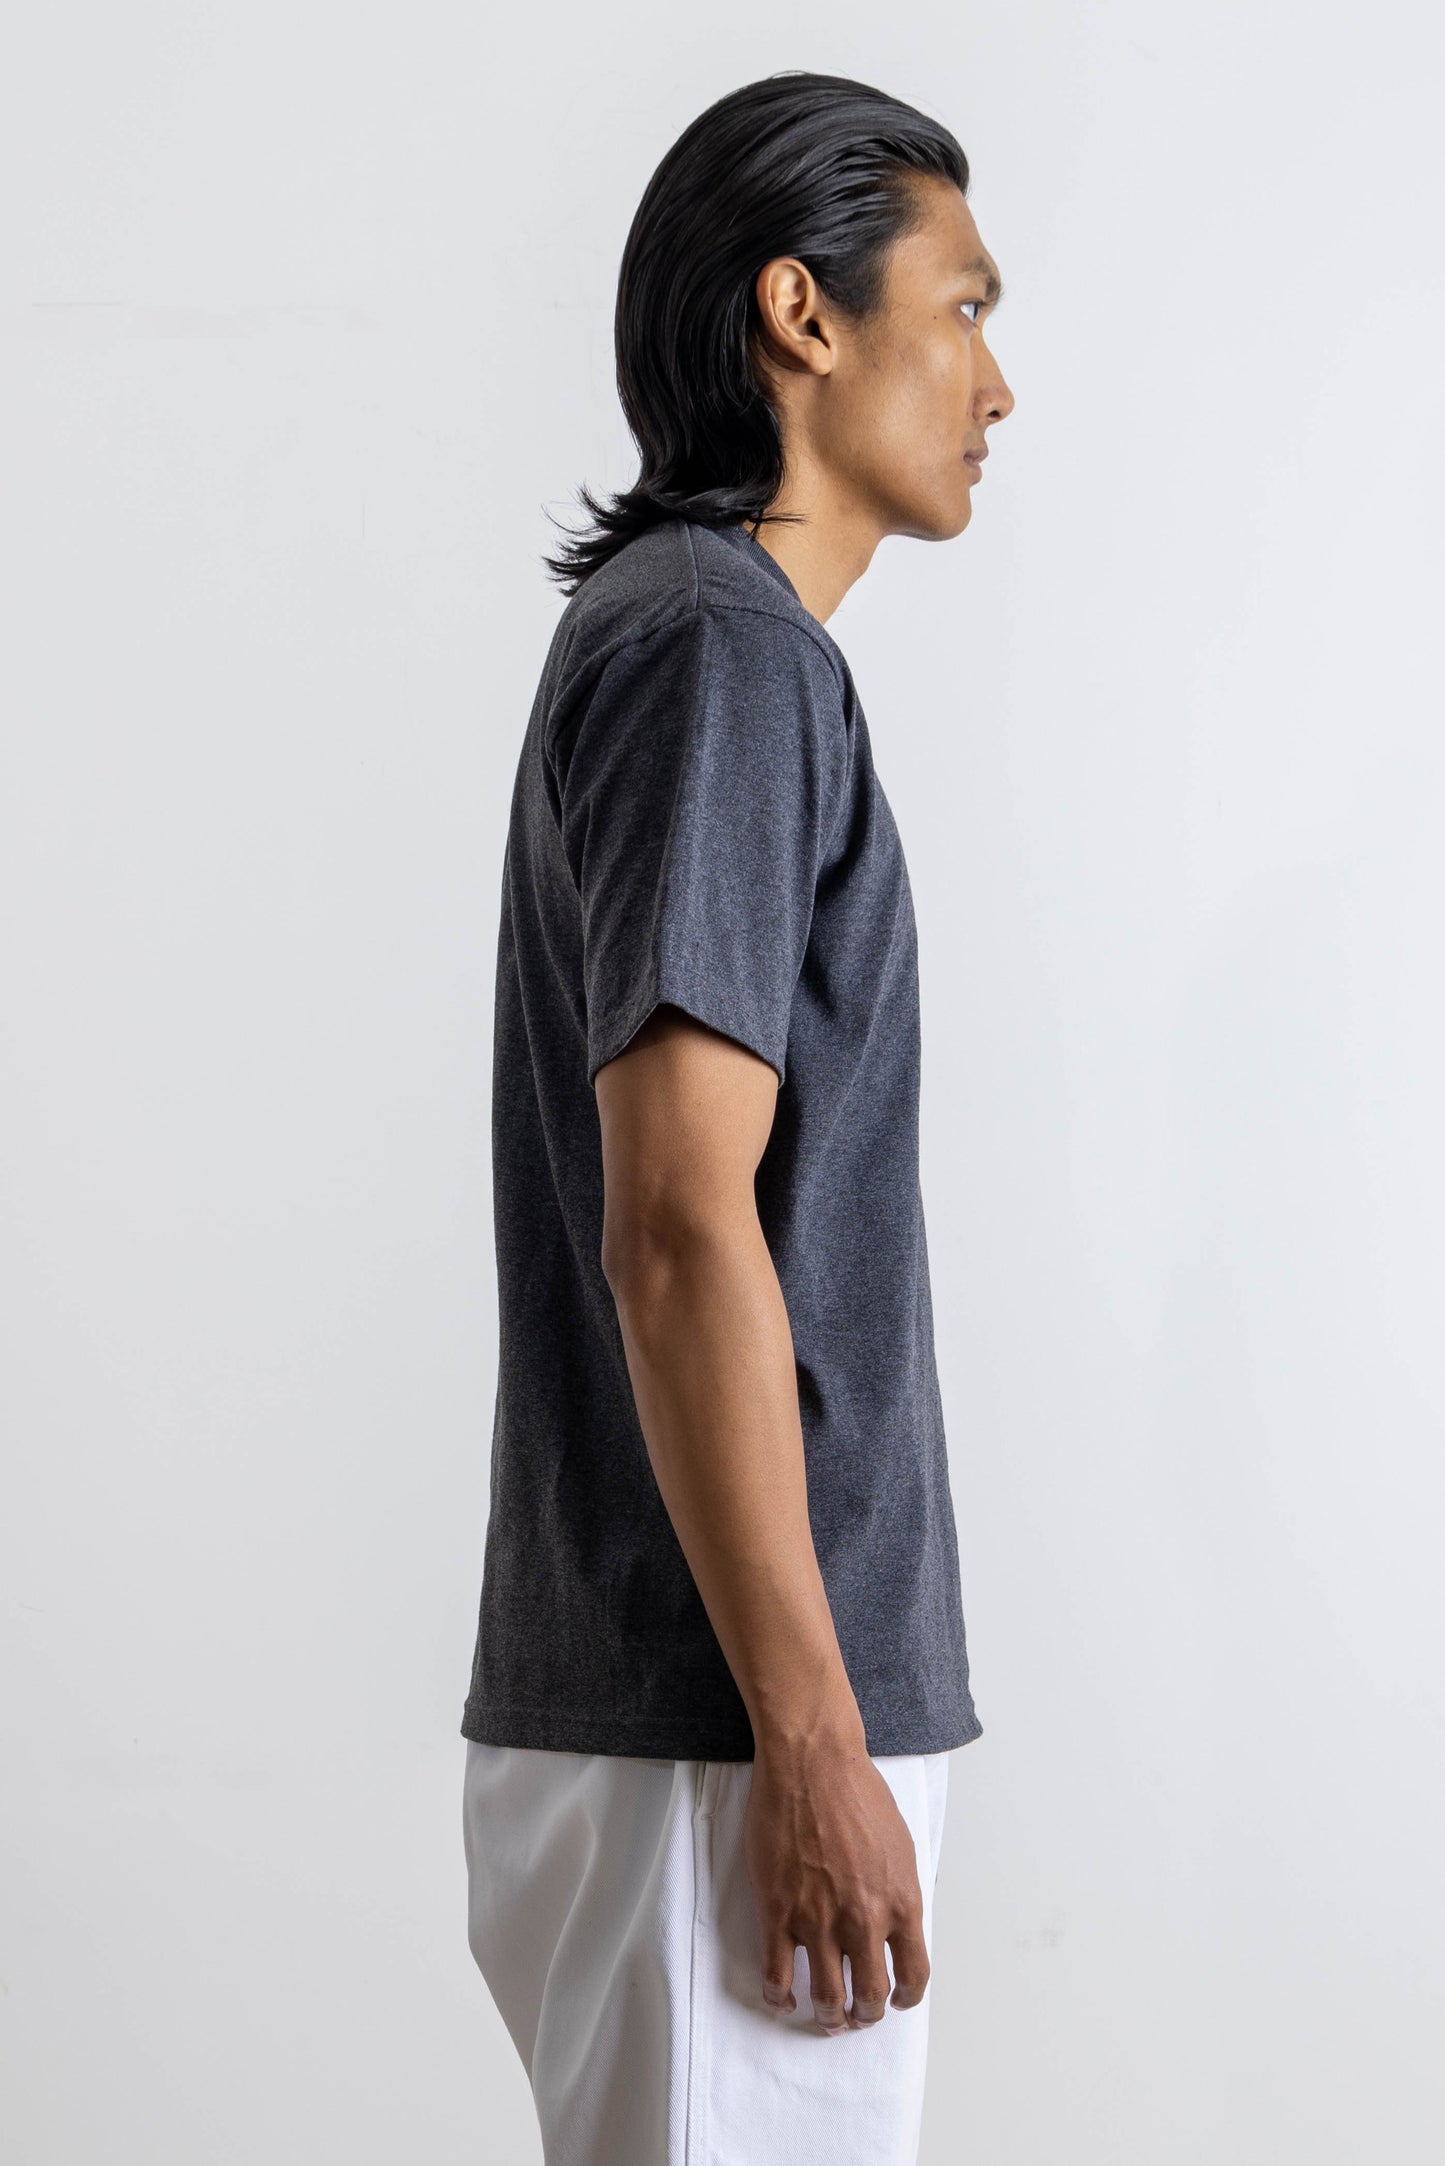 T-shirt Heavyweight Gris chiné anthracite